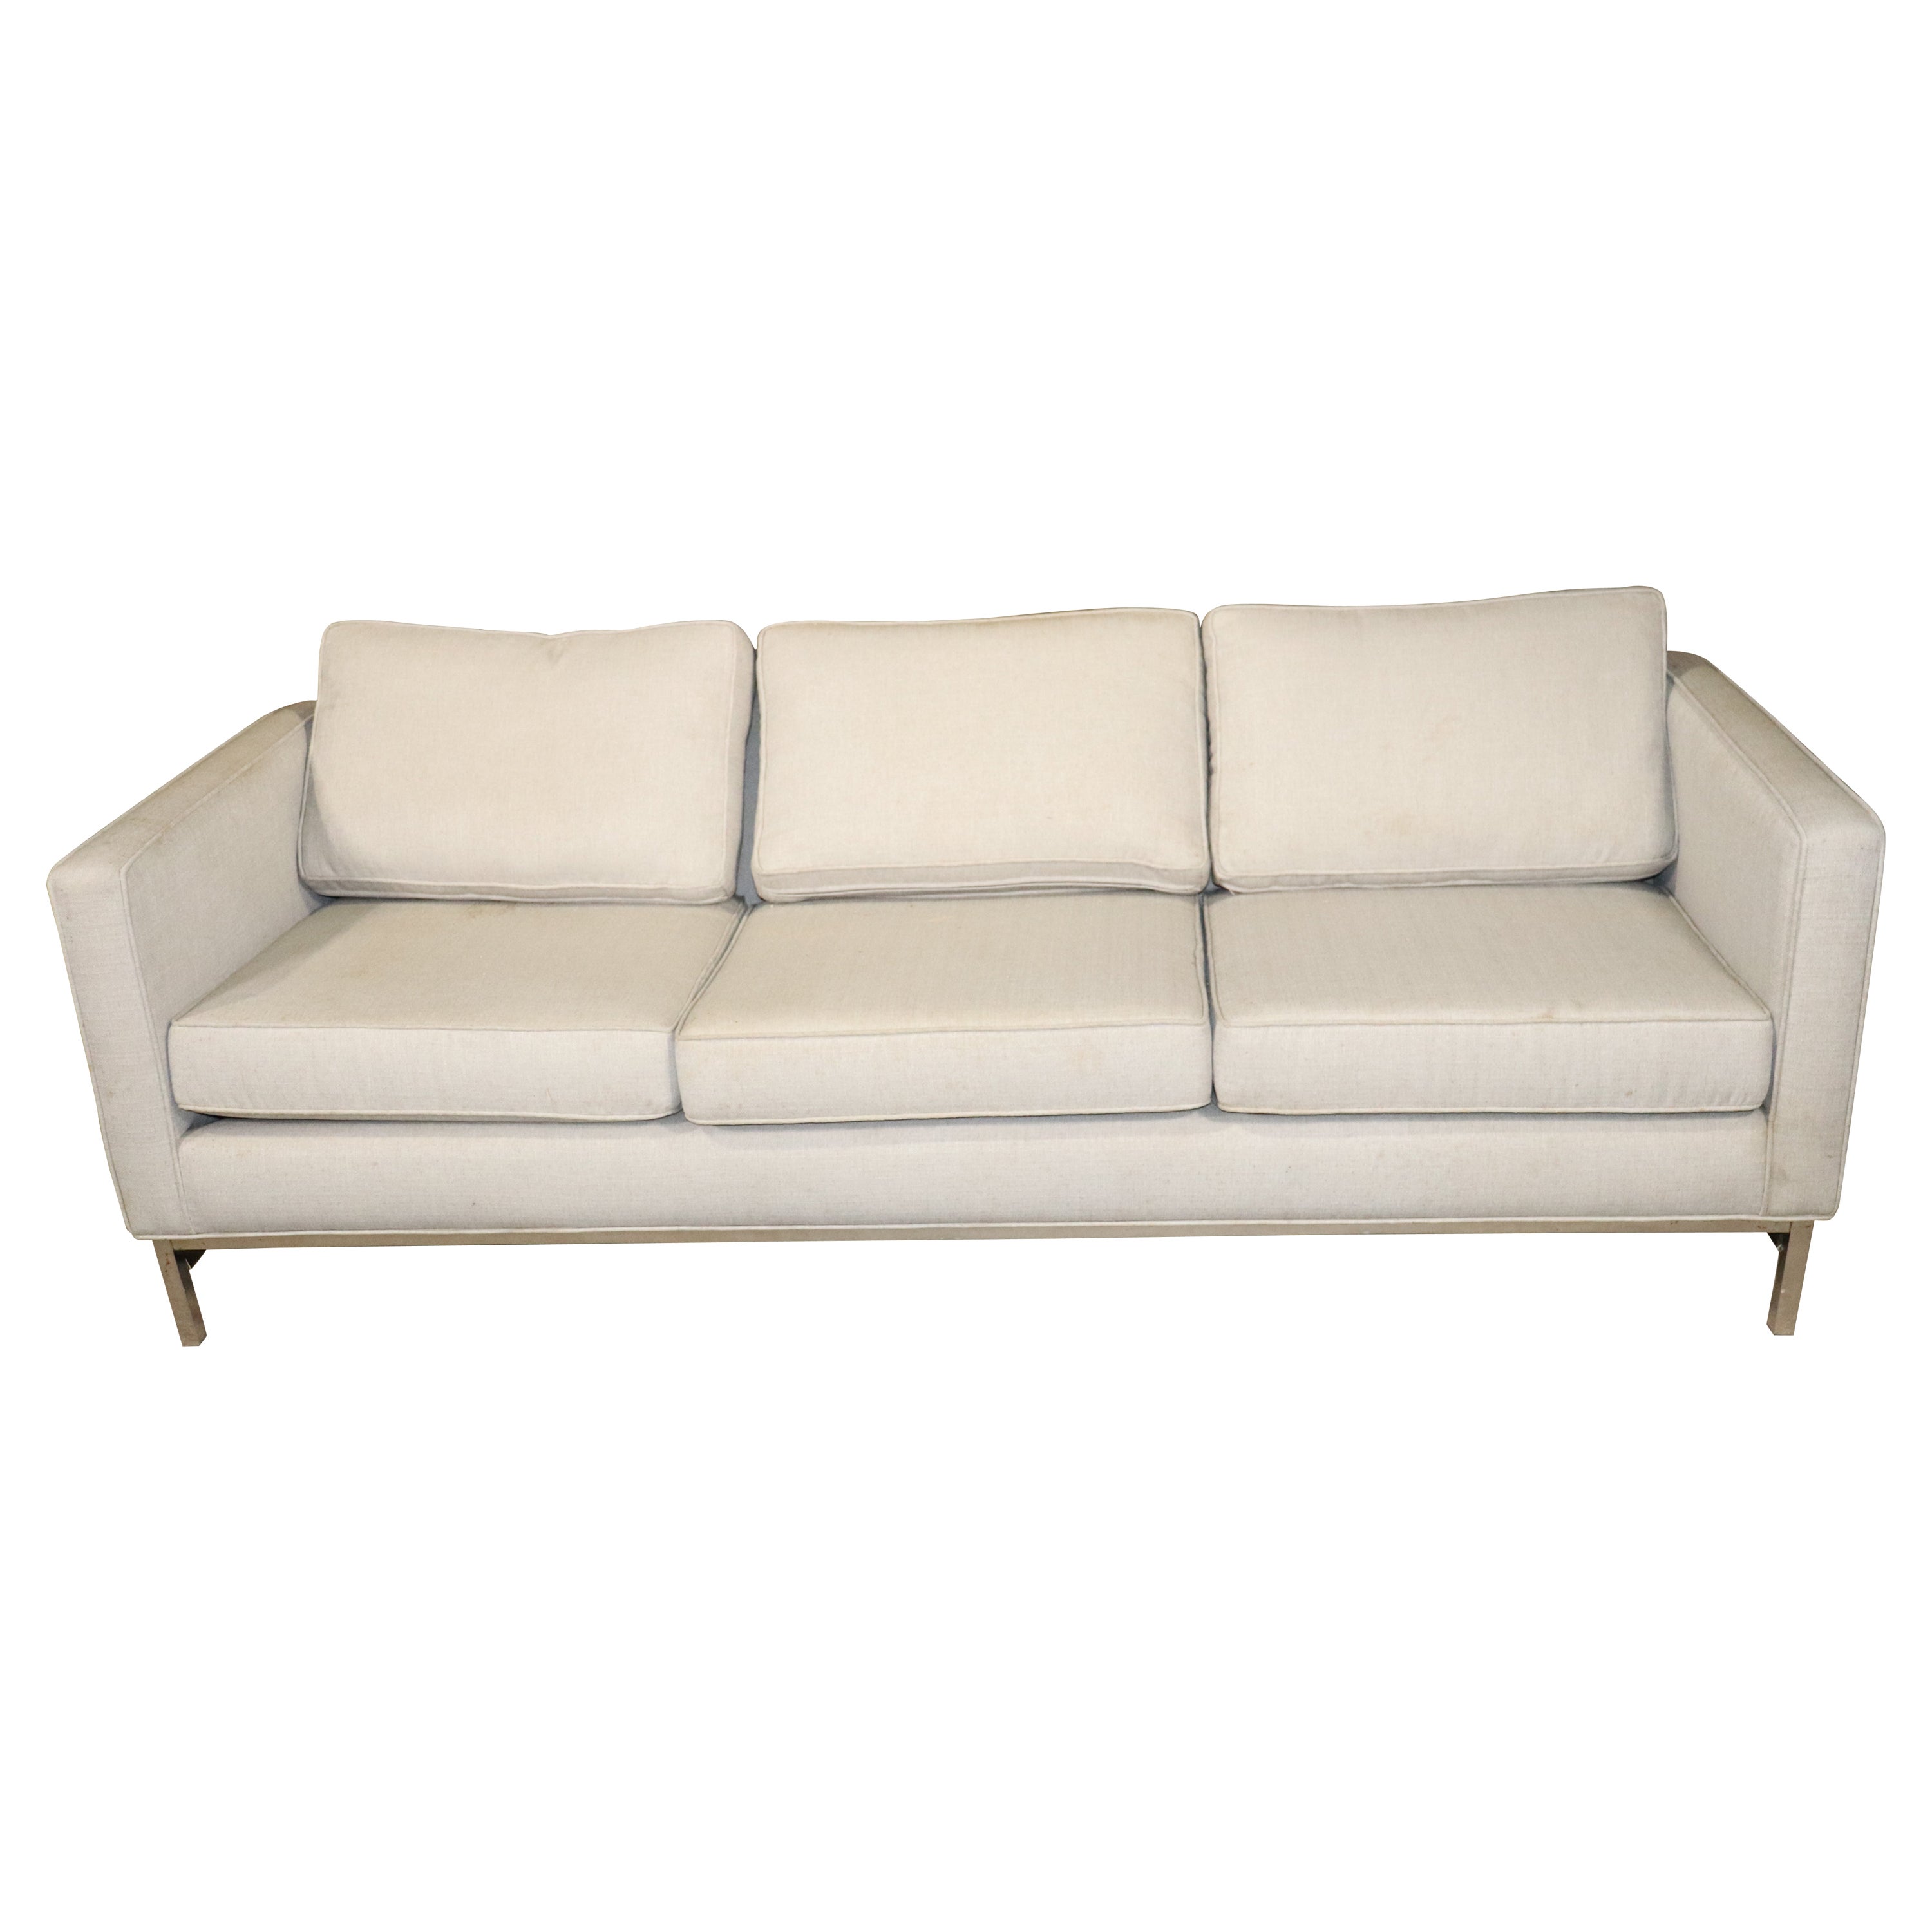 Vint Lawson | Feather 1stDibs Needs Frame at Modern Mid-Century awesome Sofa Upholstered lawson sofa Style Only